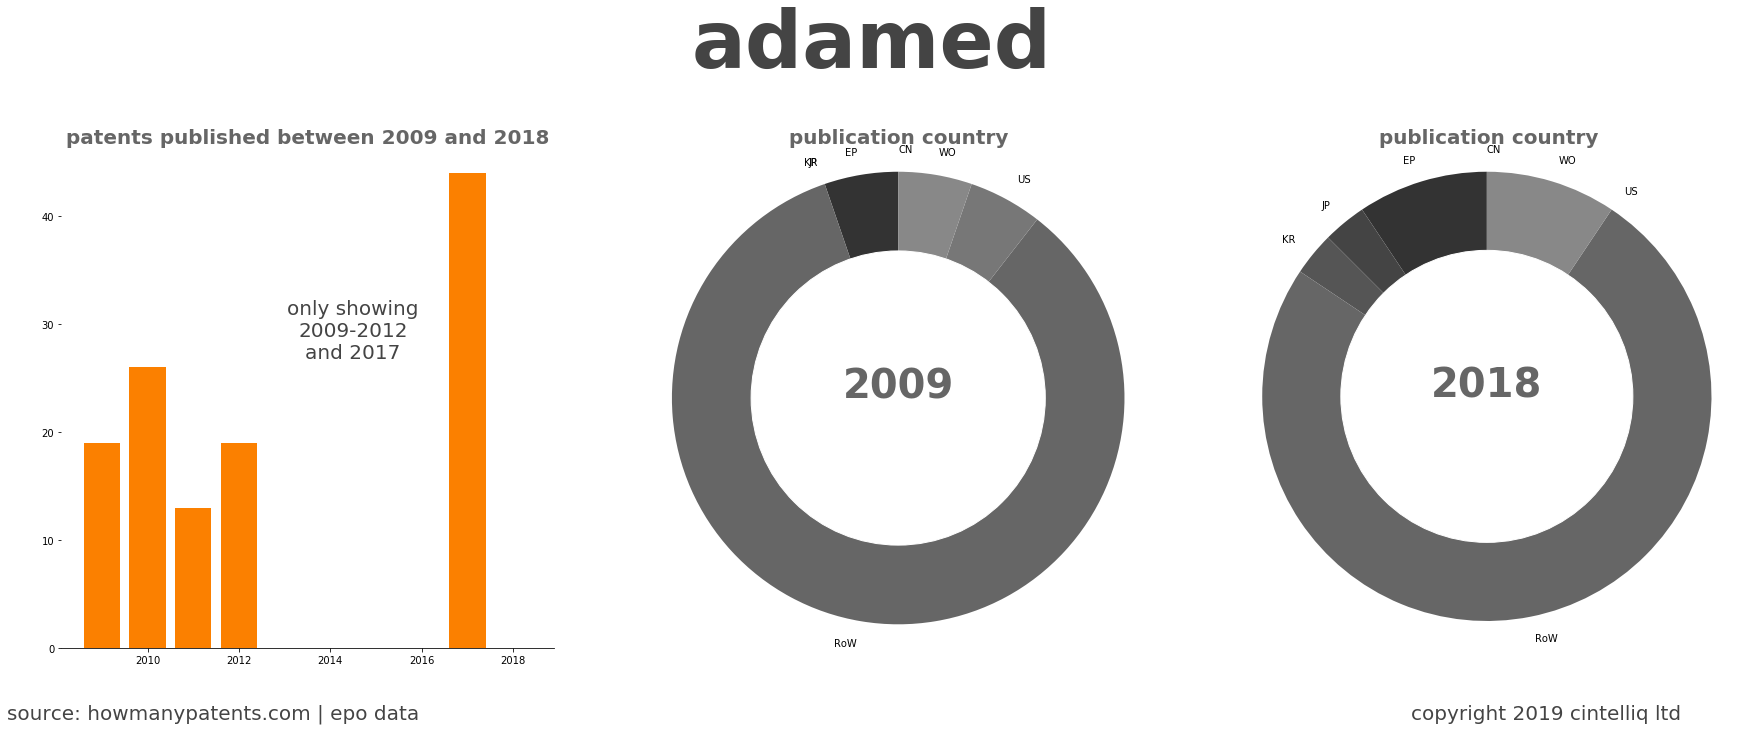 summary of patents for Adamed